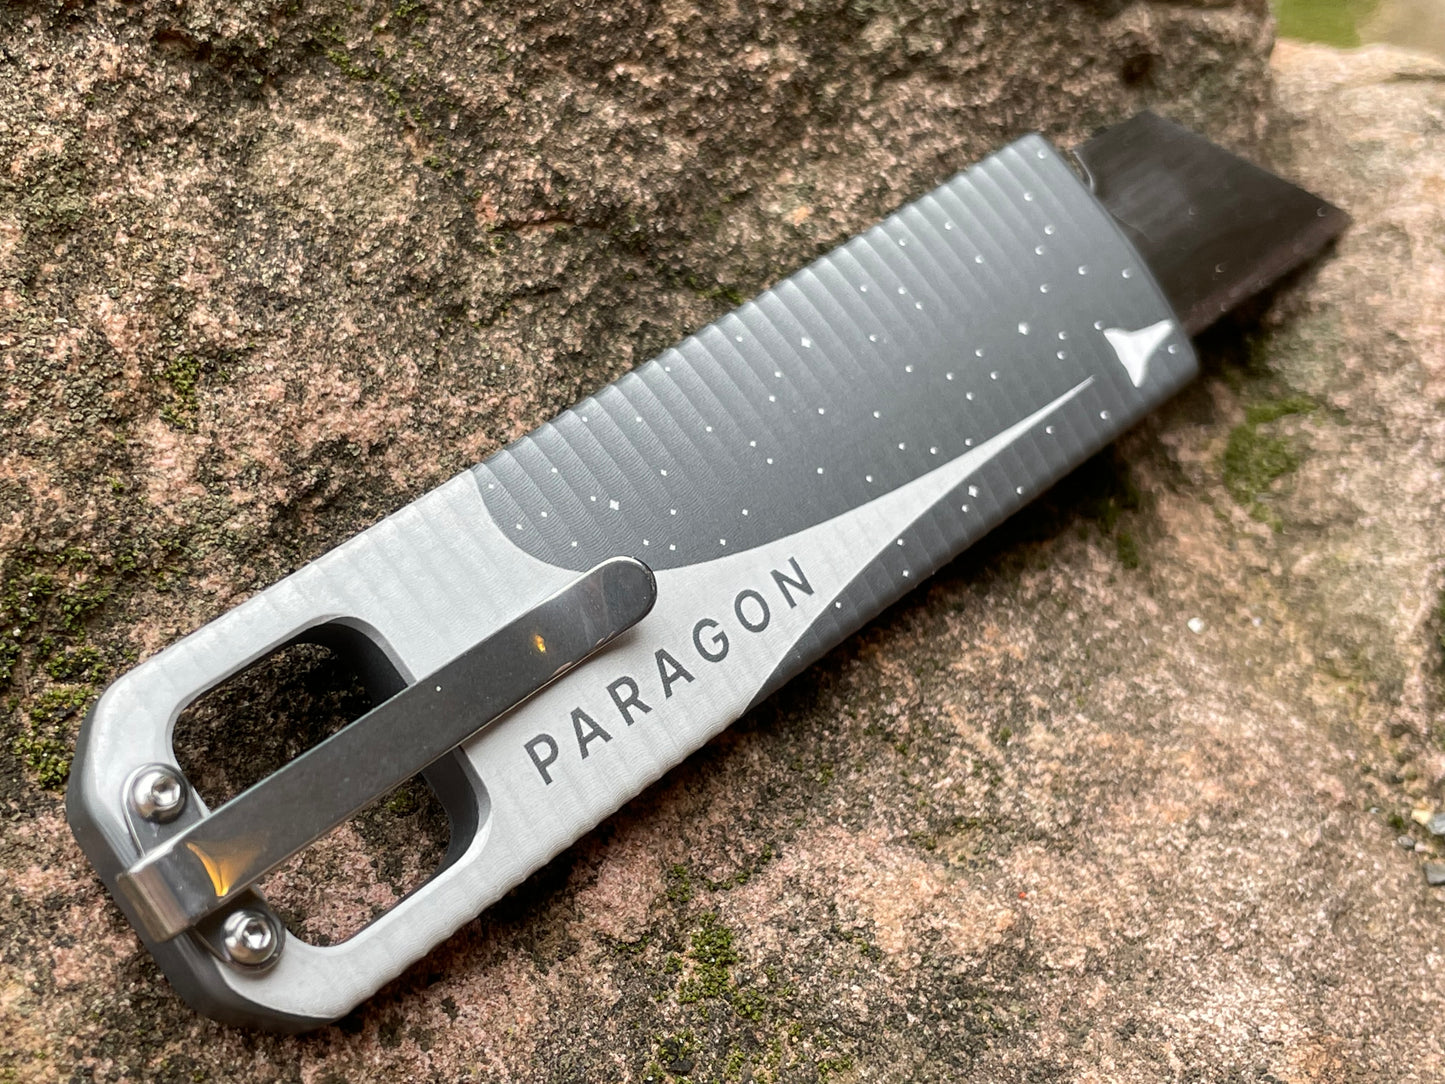 Paragon Utility Knife - Launch Edition